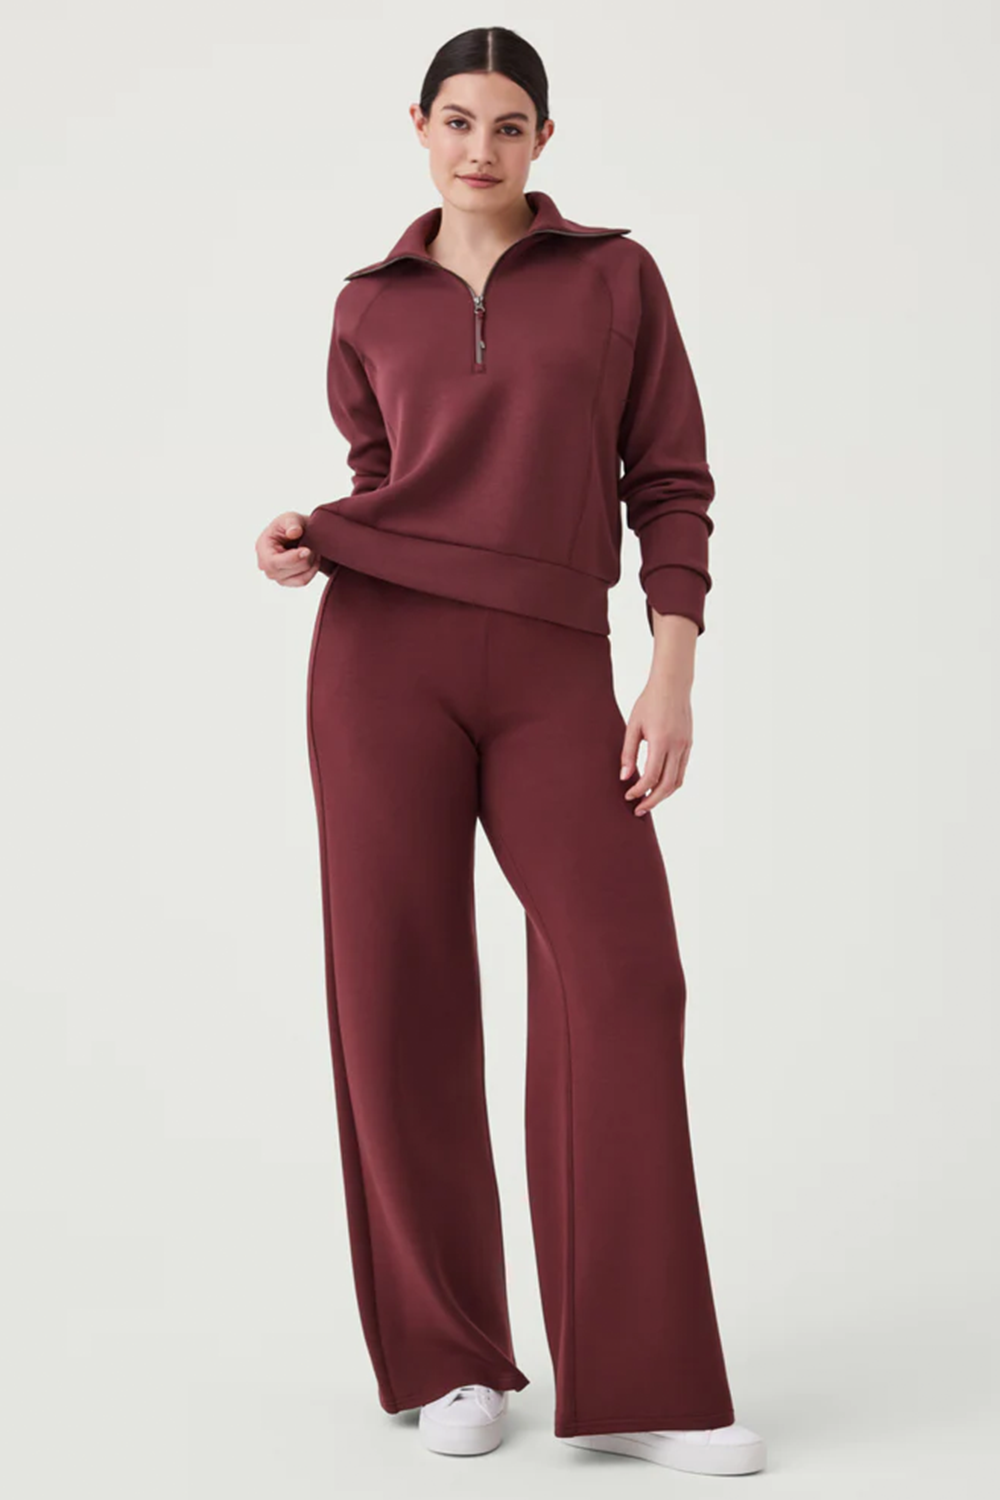 AirEssentials Wide Leg Pant in Spice